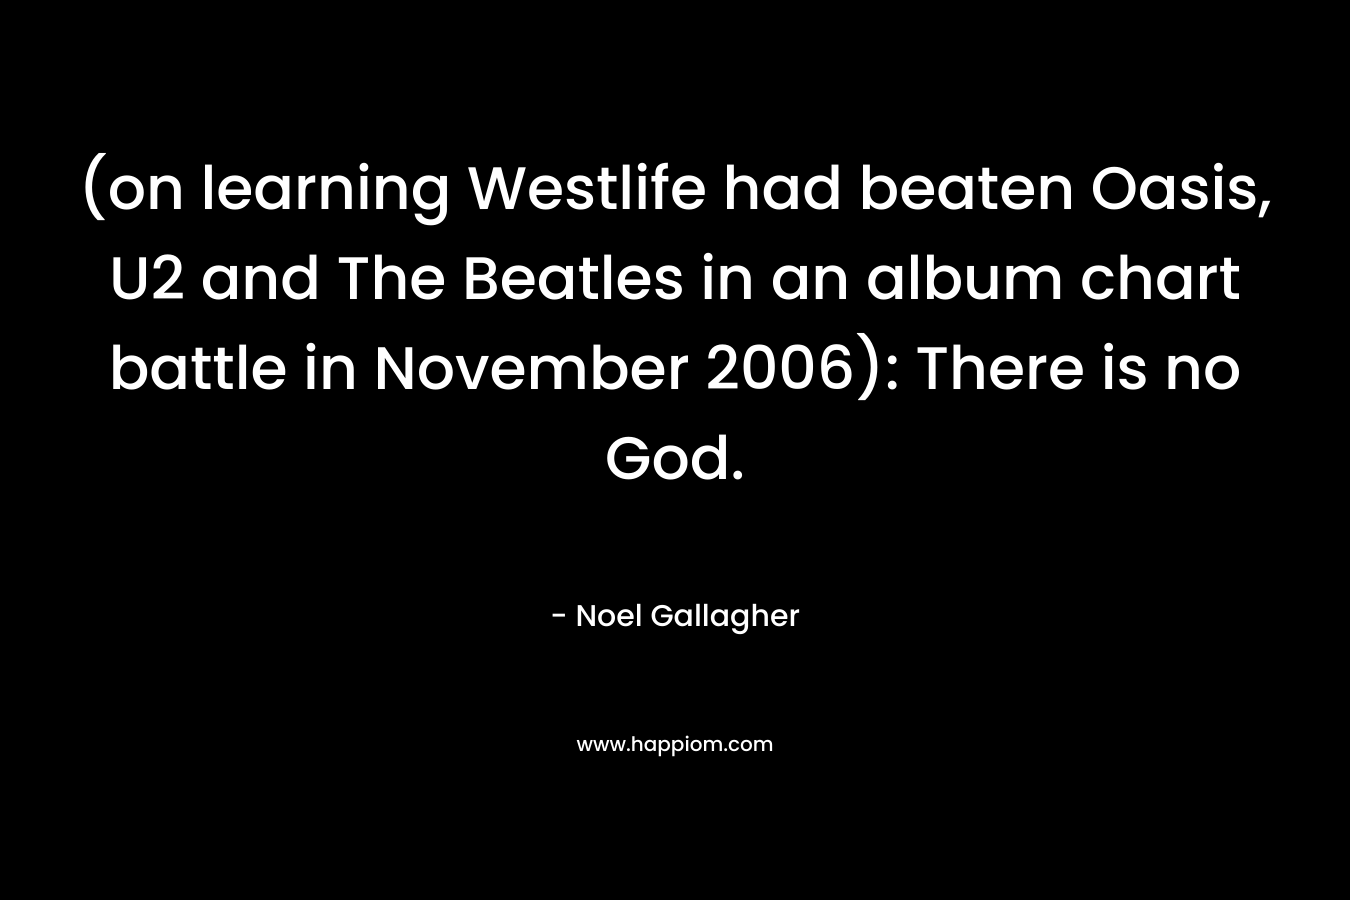 (on learning Westlife had beaten Oasis, U2 and The Beatles in an album chart battle in November 2006): There is no God.